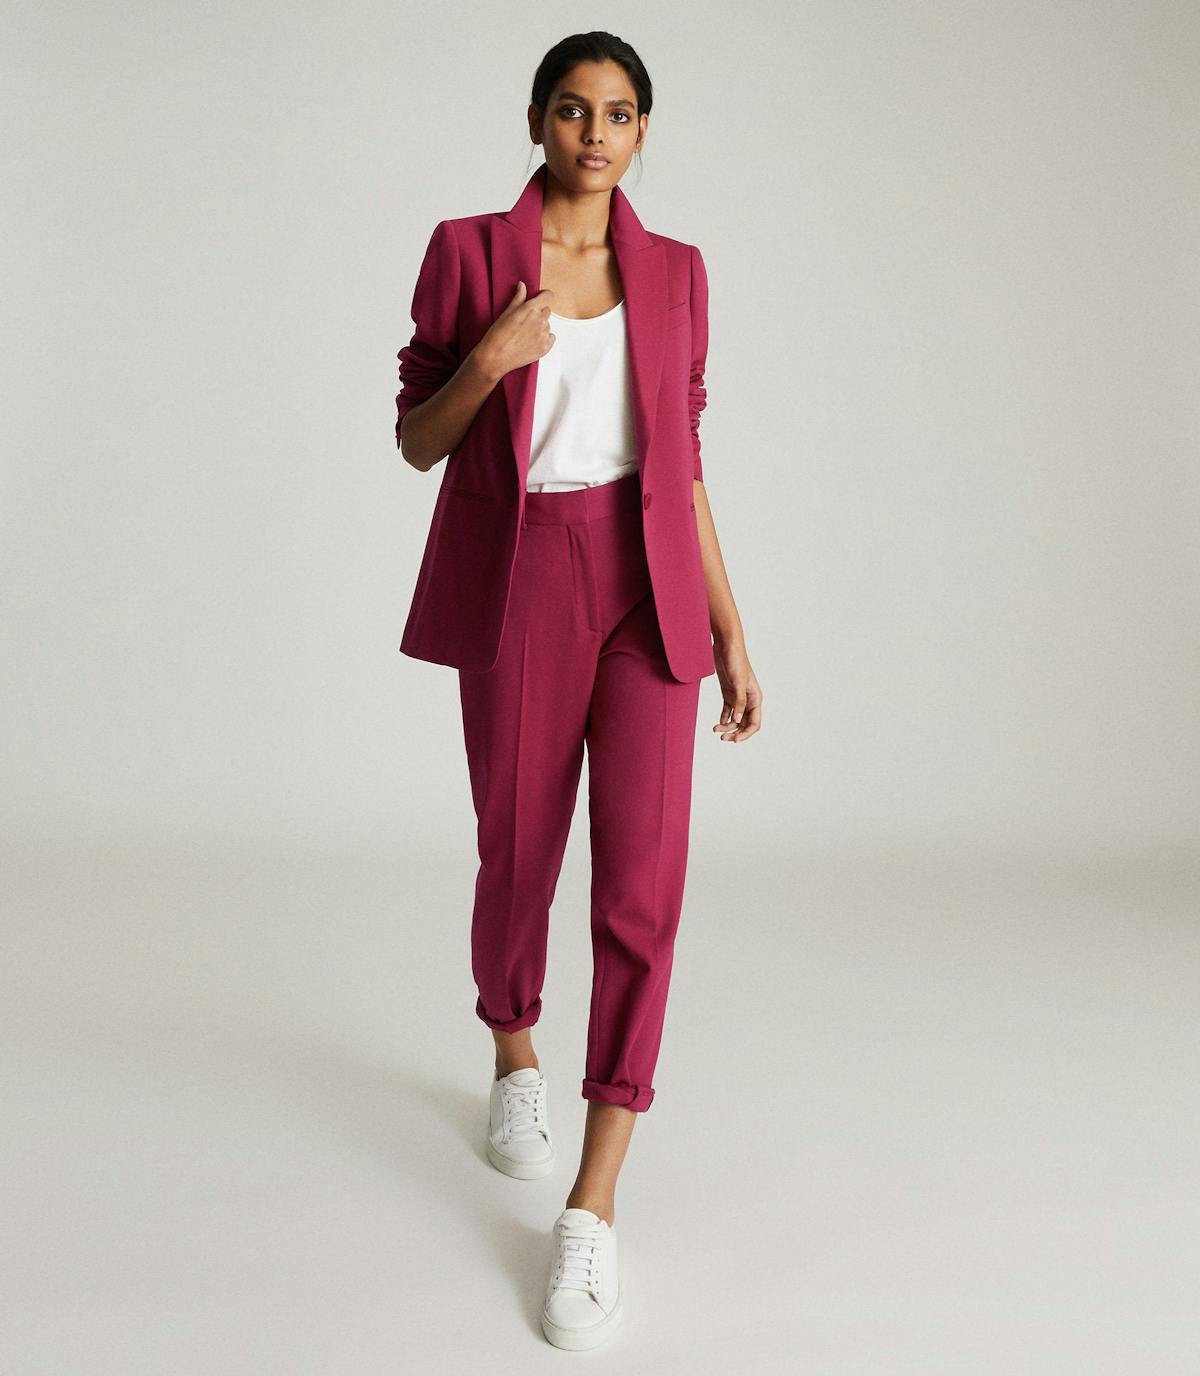 11 best colourful blazers to brighten up winter outfits